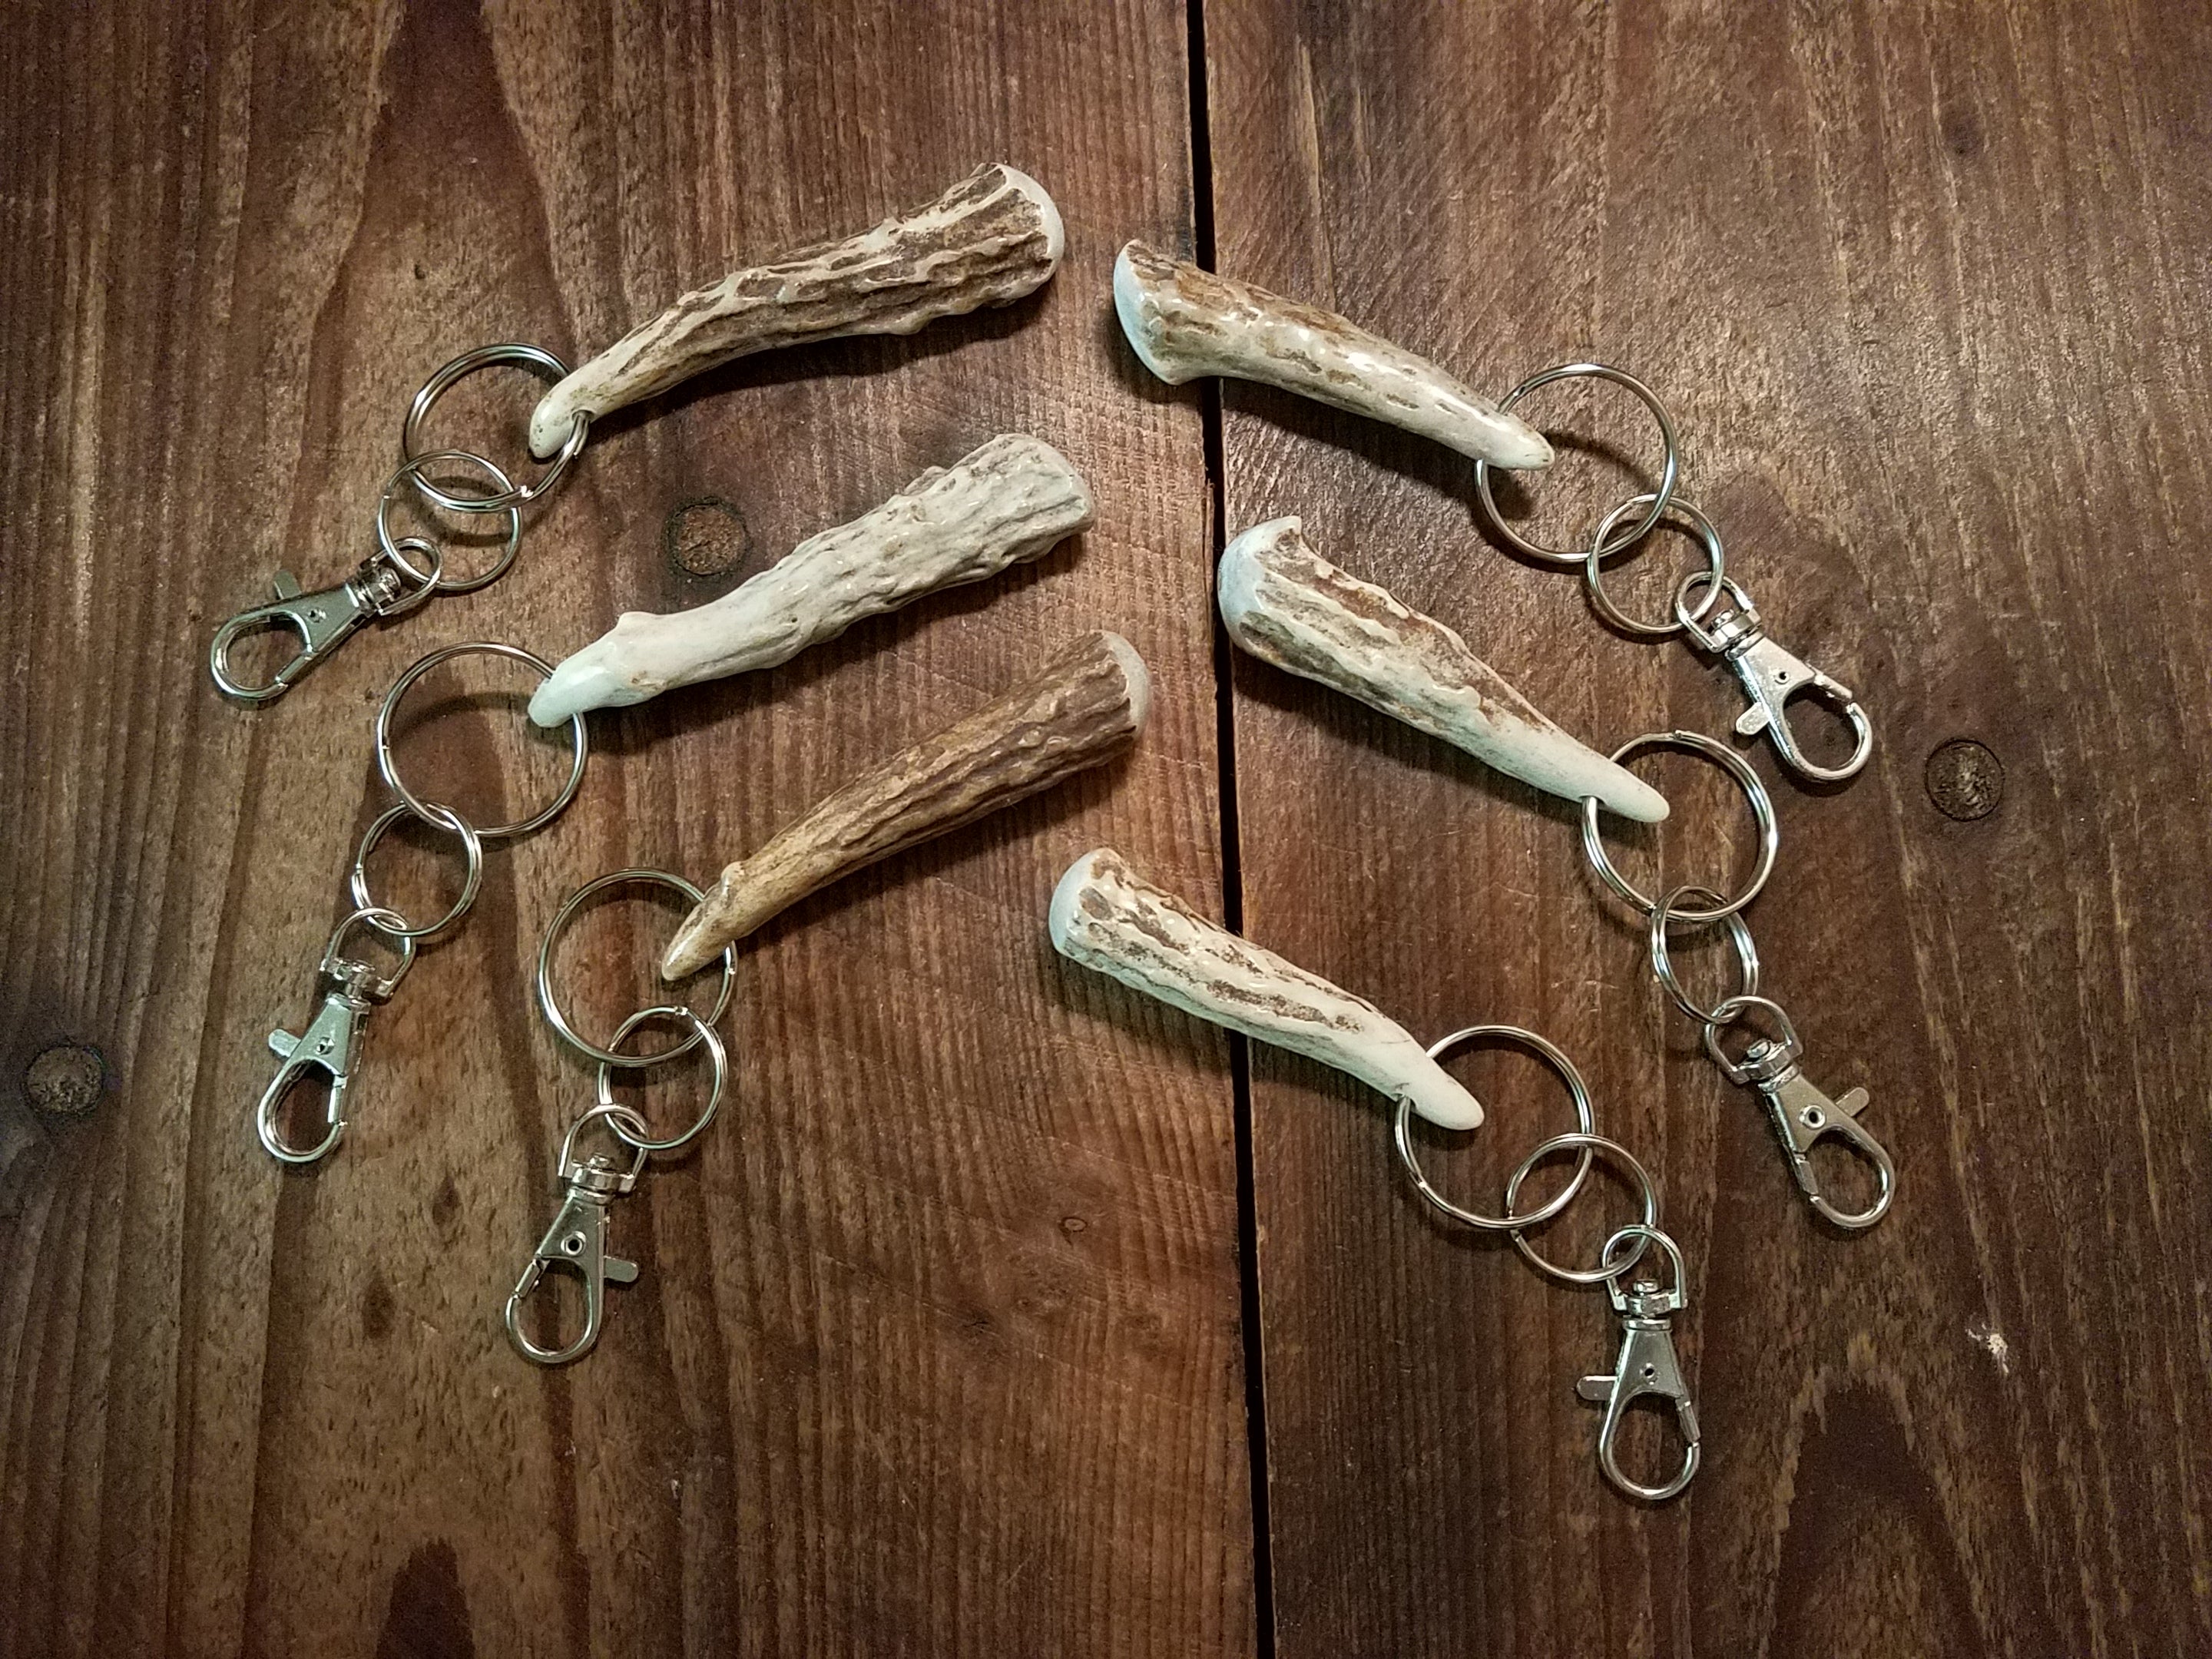 Guardian Brow Tine Key Rings in two sizes by Antler Artisans 